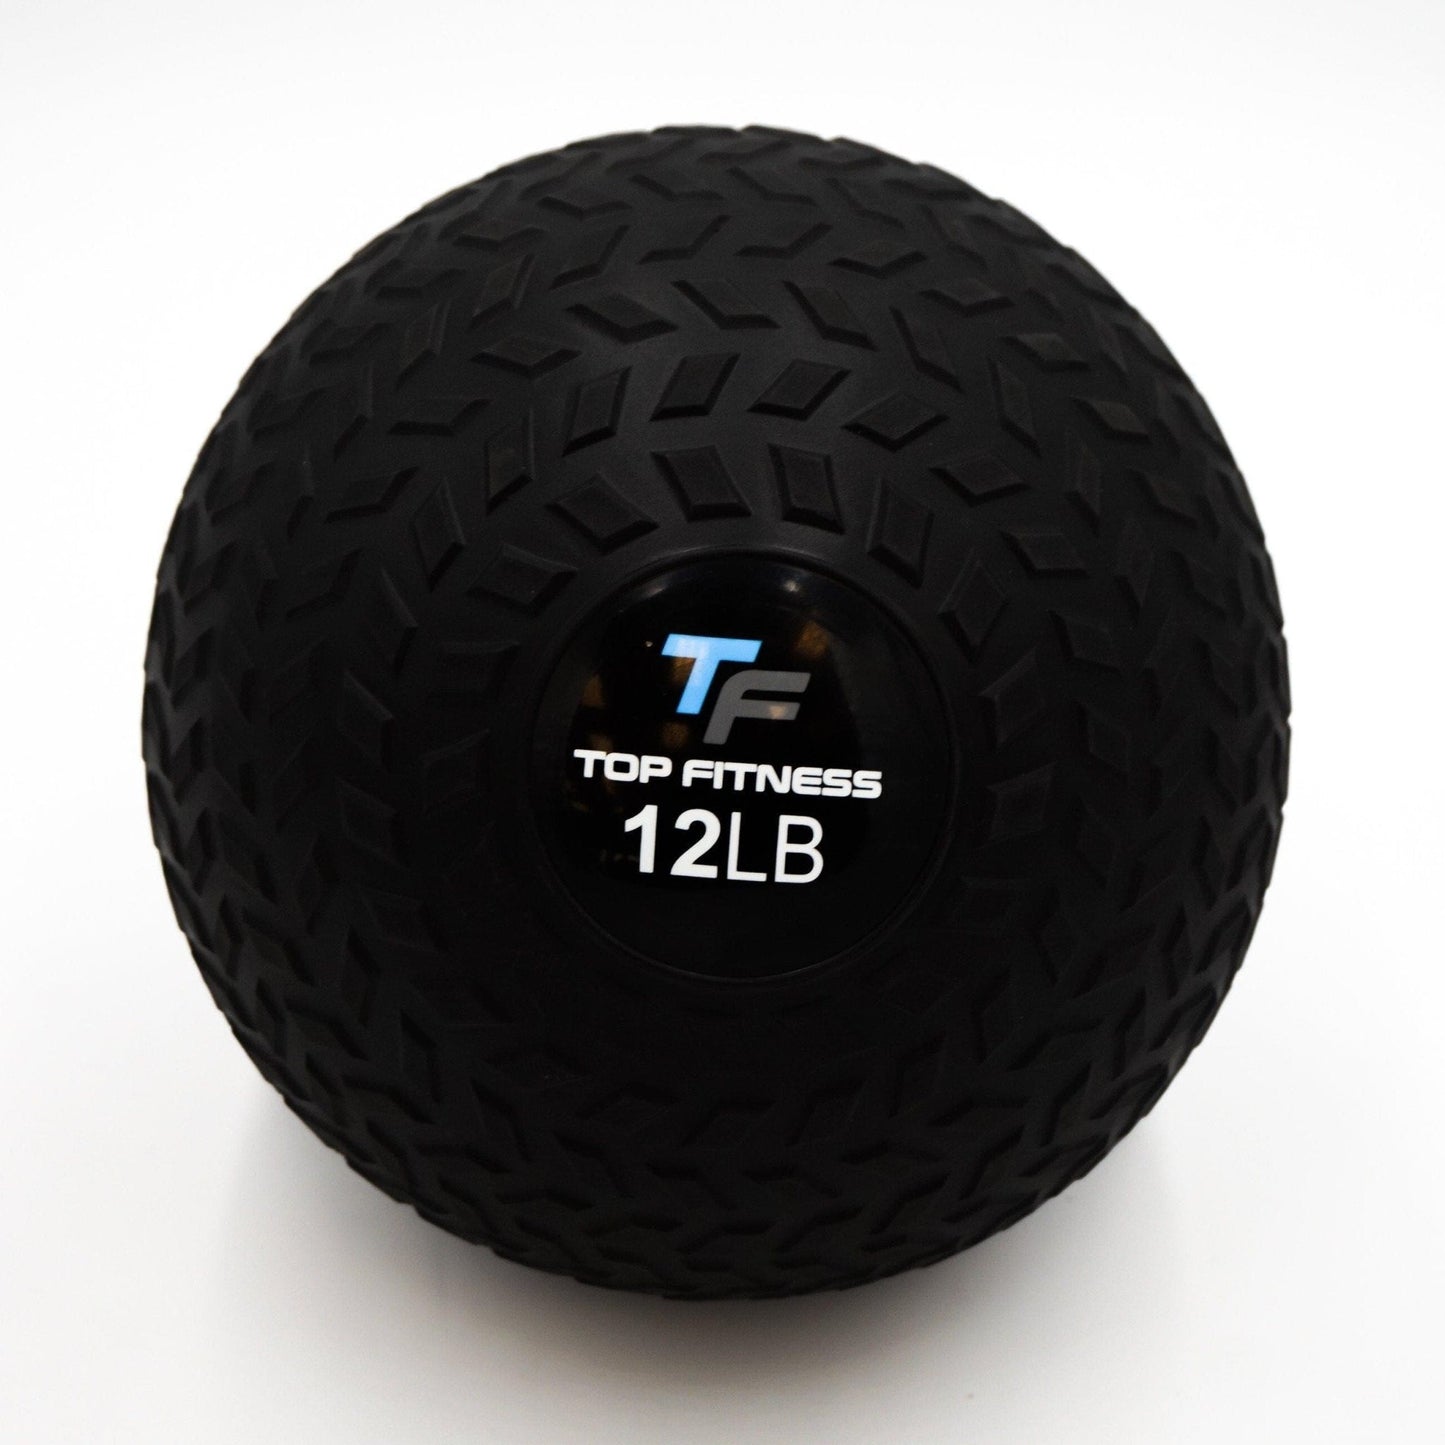 Top Fitness Slam Ball Weighted Resistance Top Fitness 12lb